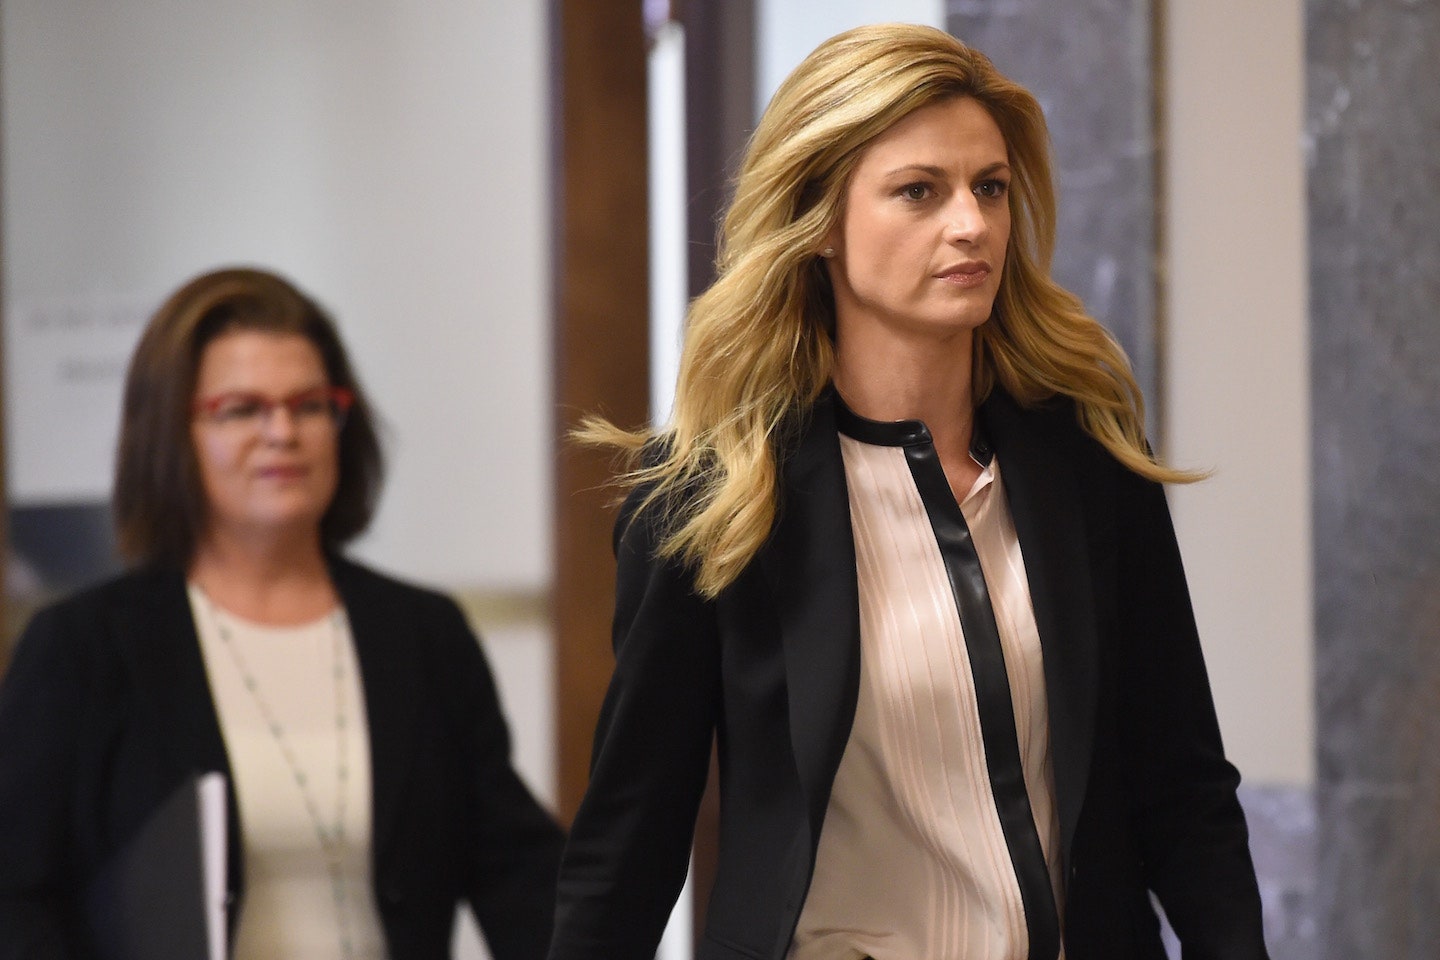 blake surber recommends watch erin andrews nude pic